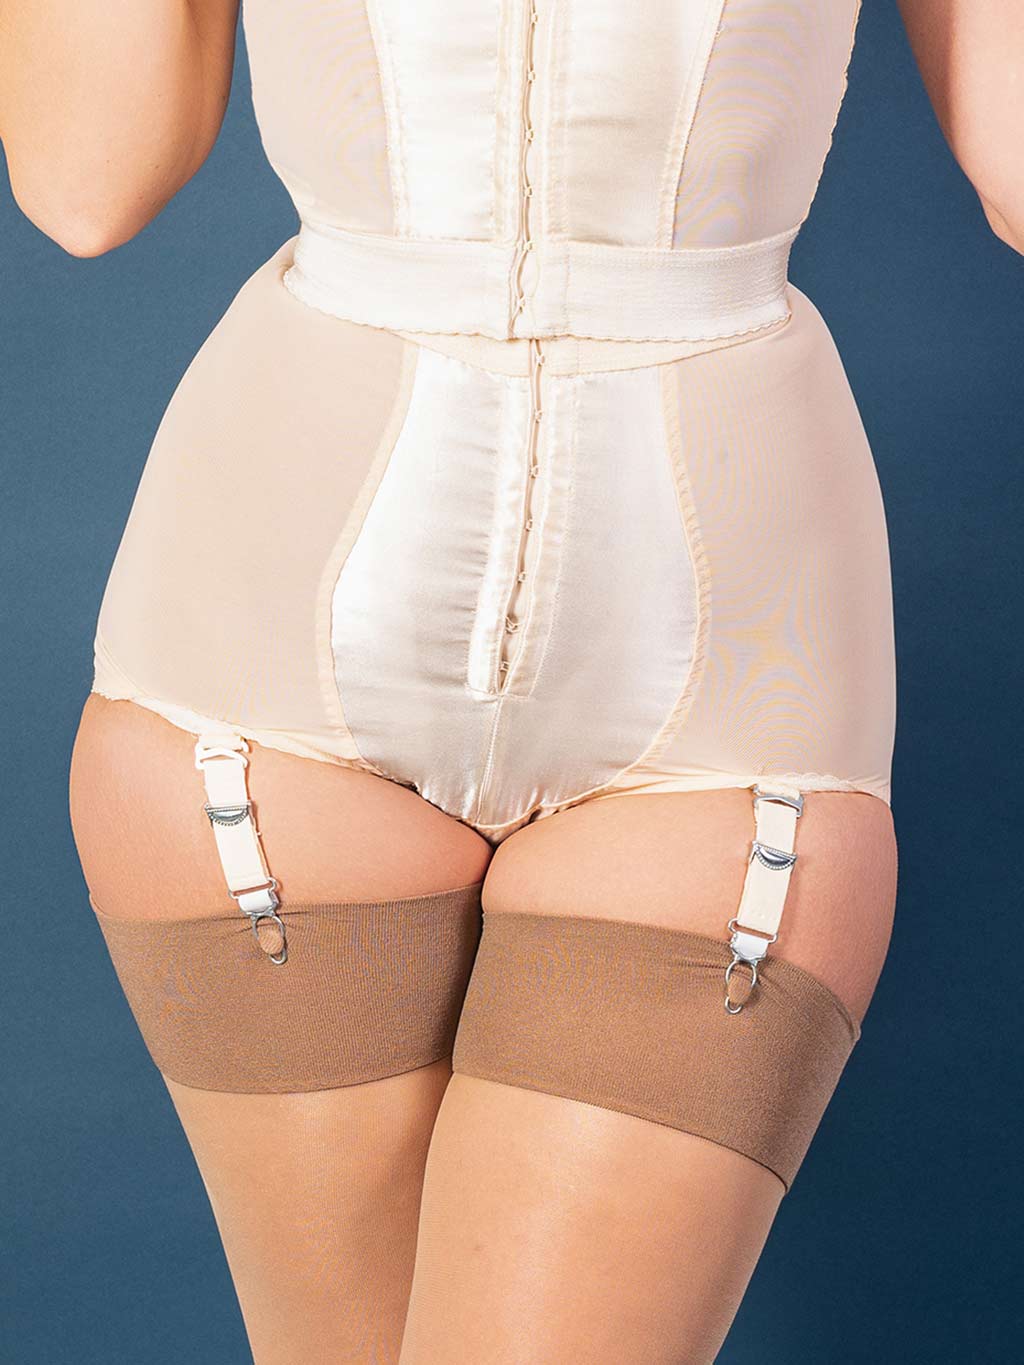 Pack of 2 Panty Girdles - Open-Girdle 